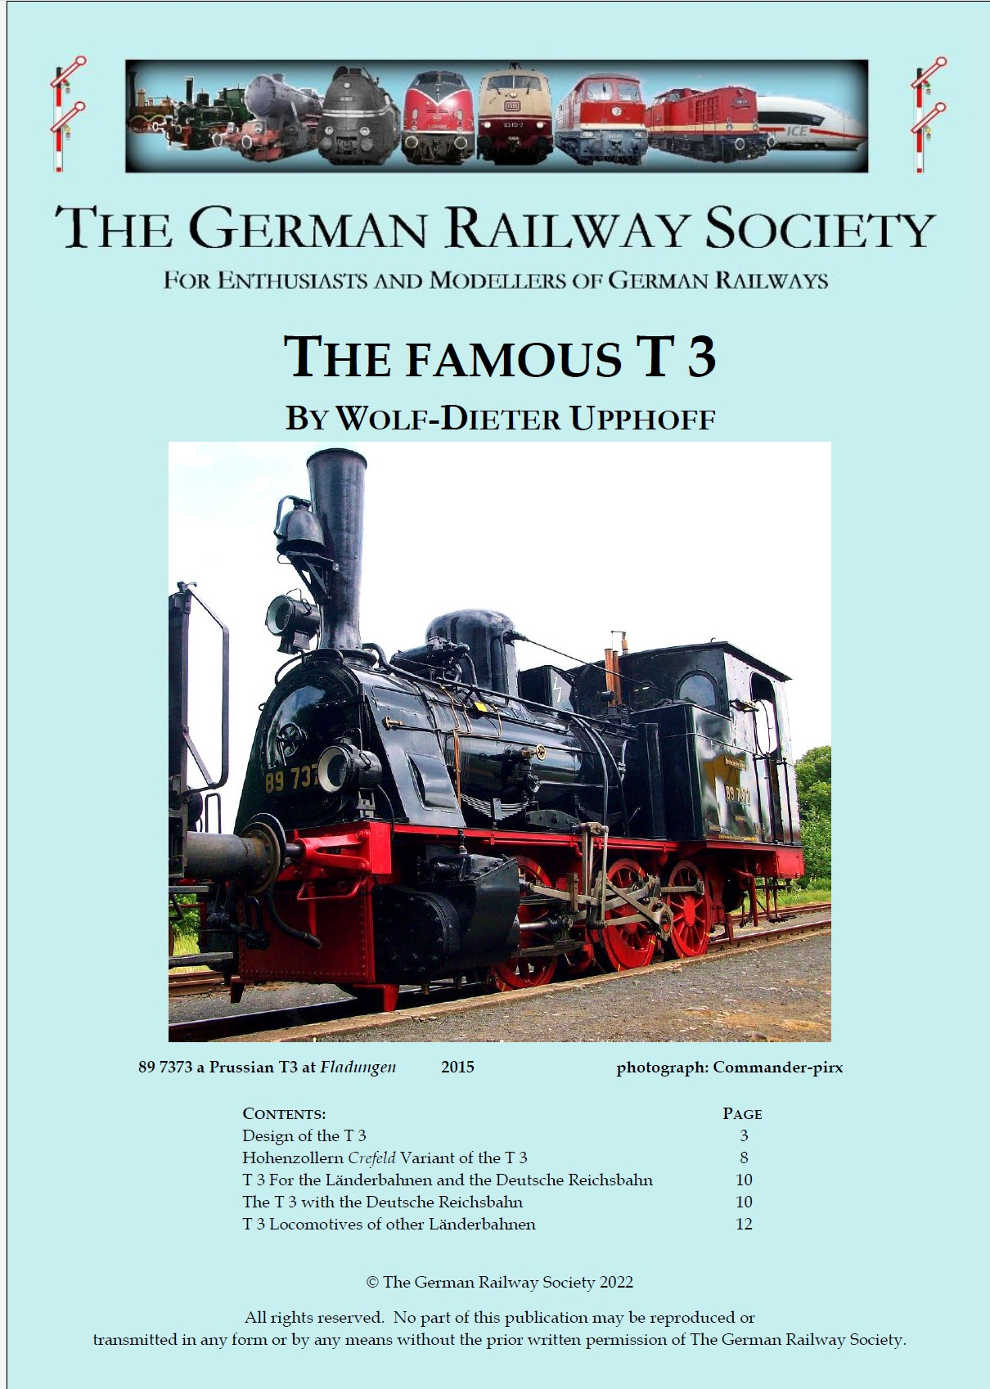 Cover image: The famous T3